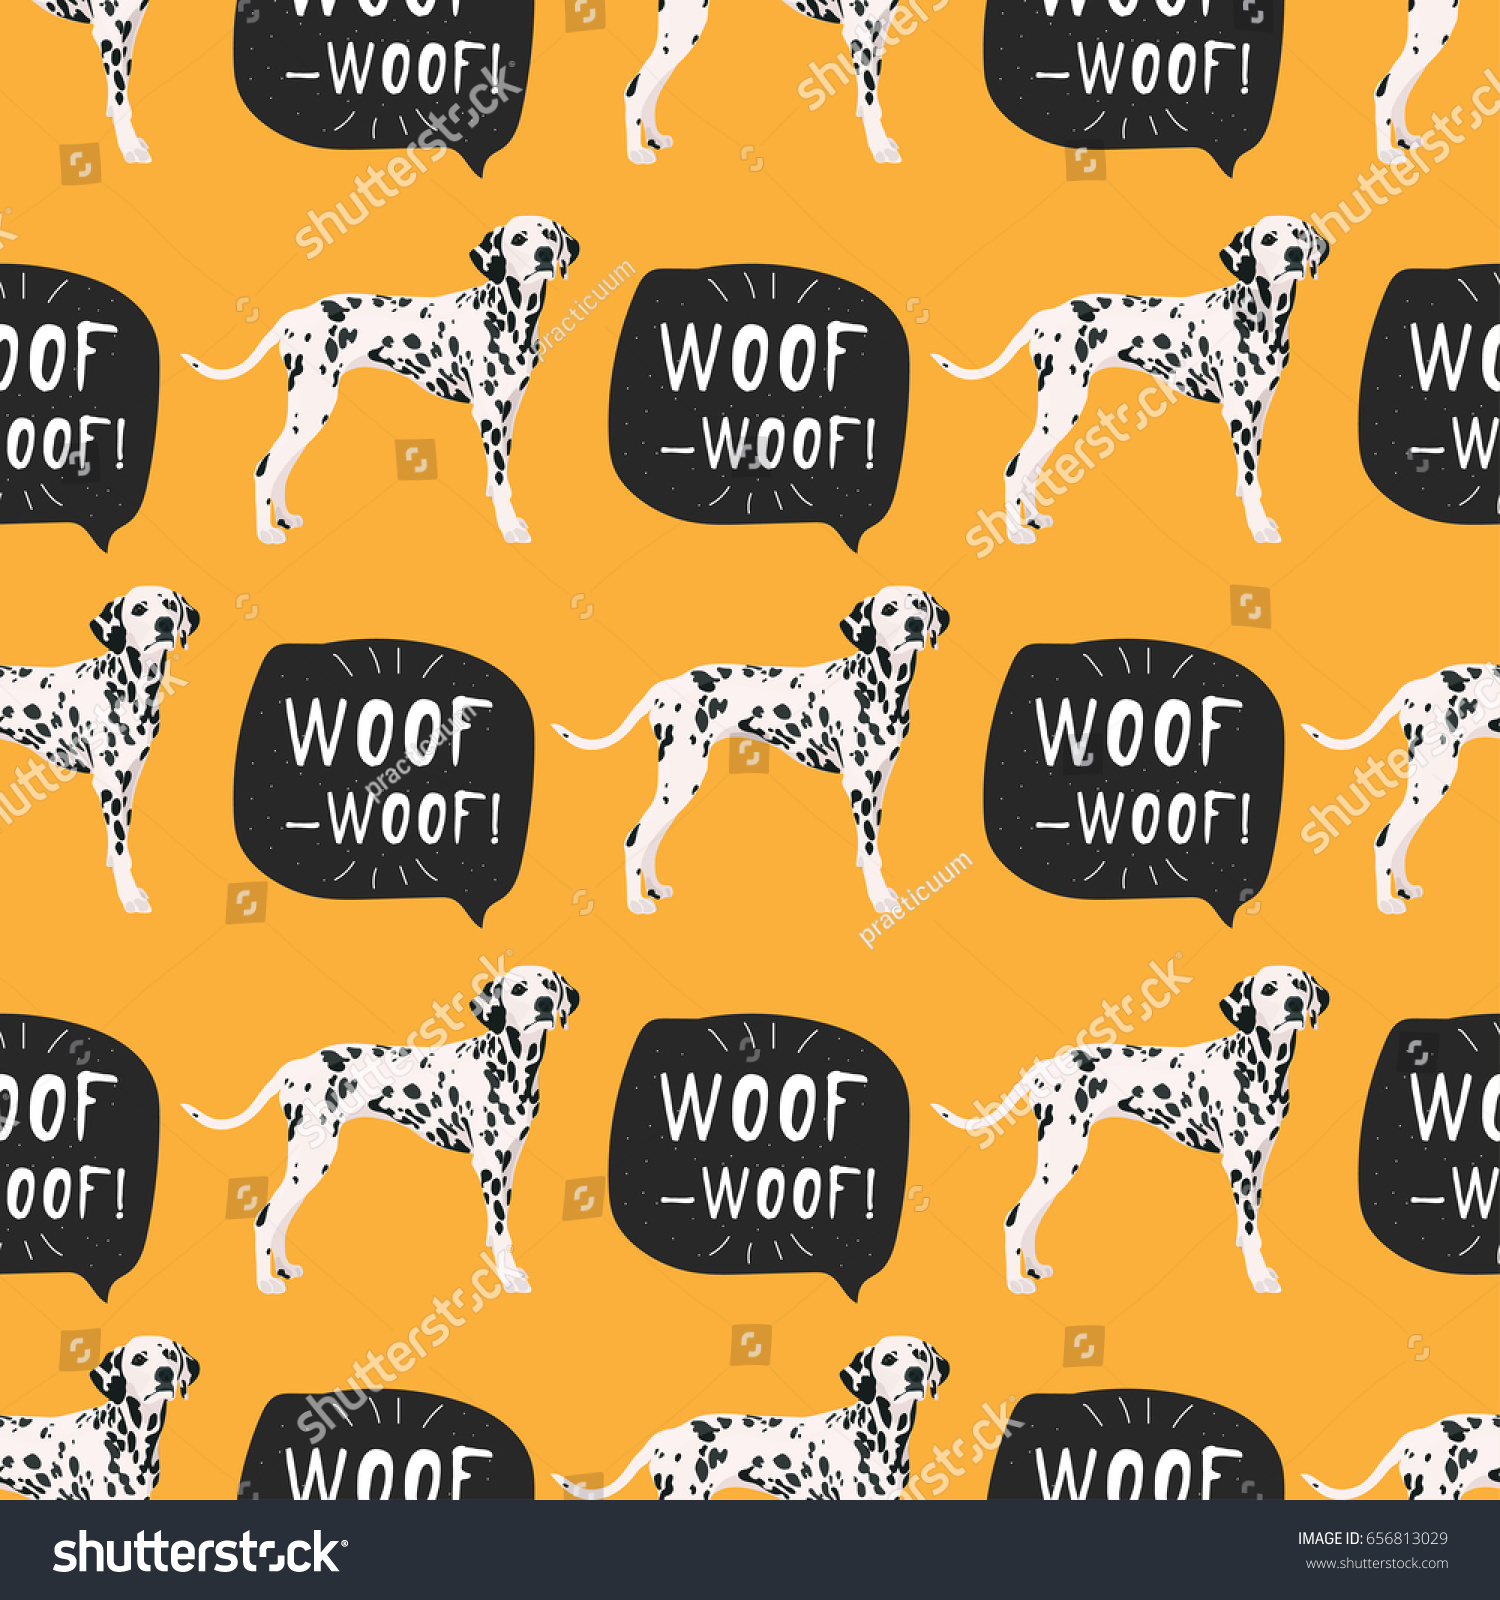 SVG of Dog dalmatian seamless pattern colorful with hand drawn banner woof-woof svg